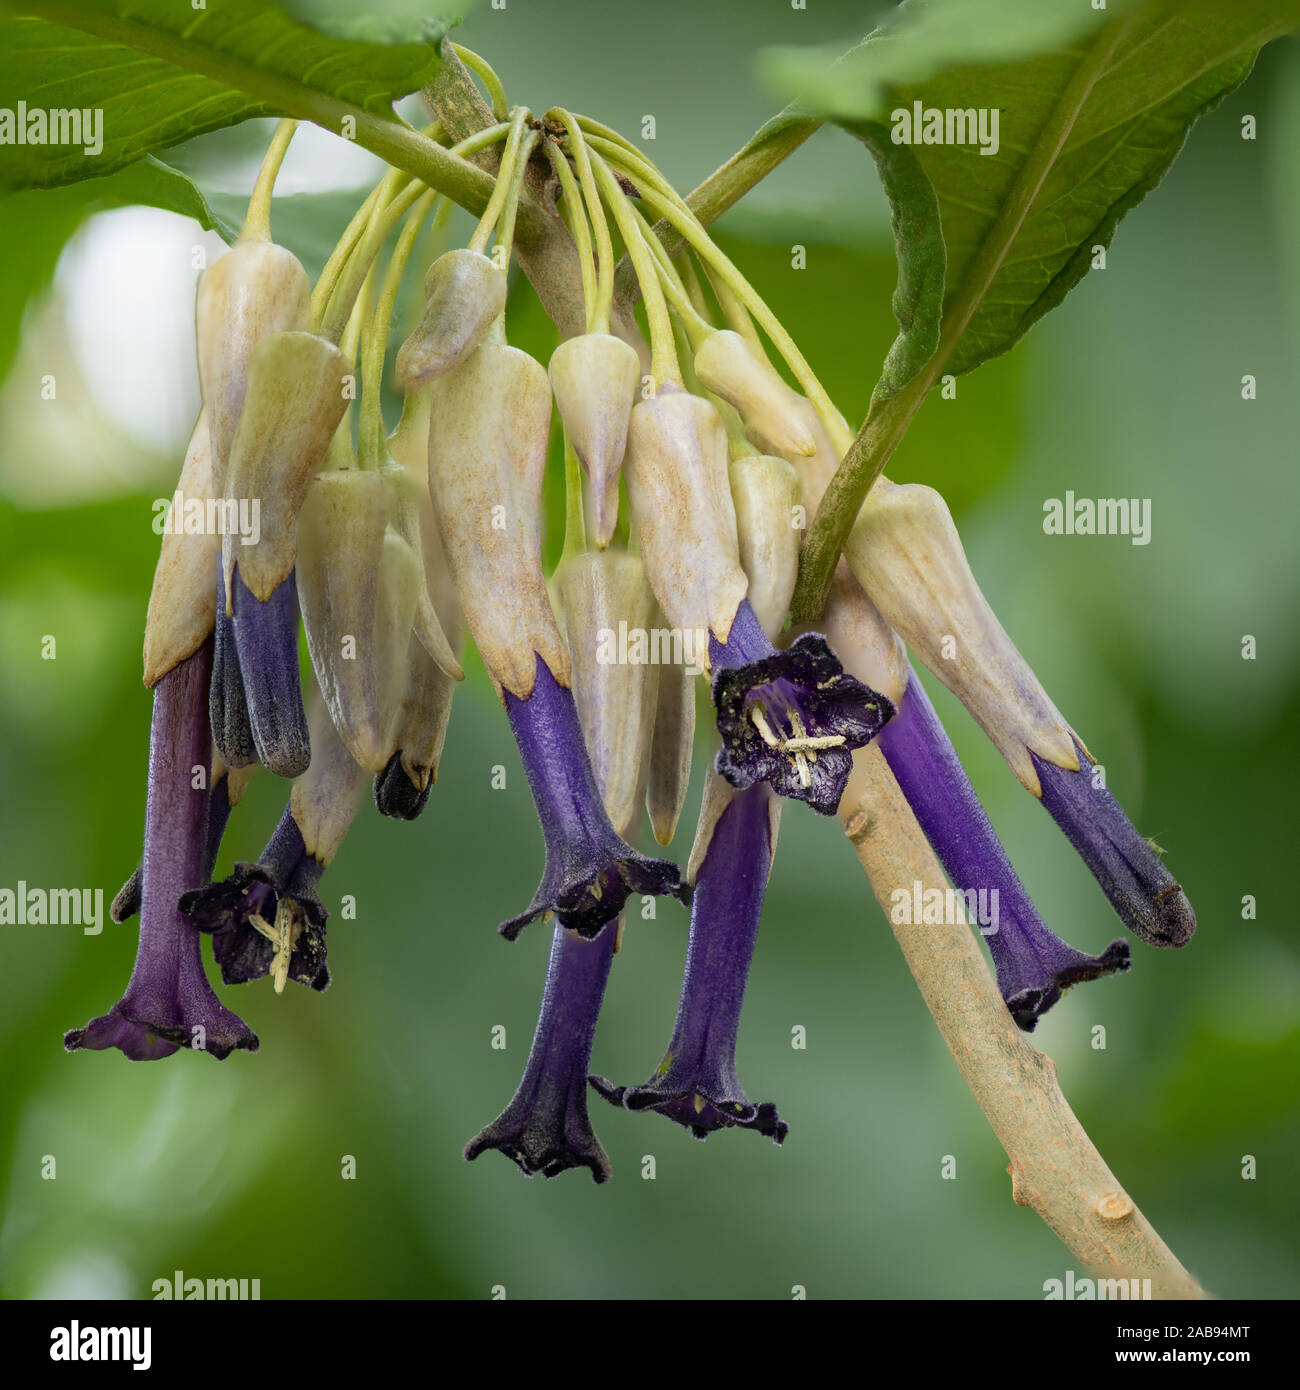 Lochroma calycina is a medium, evergreen shrub that flowers in Spring, Summer and Autumn. It has dark blue tubular flowers in pendular clusters. Stock Photo